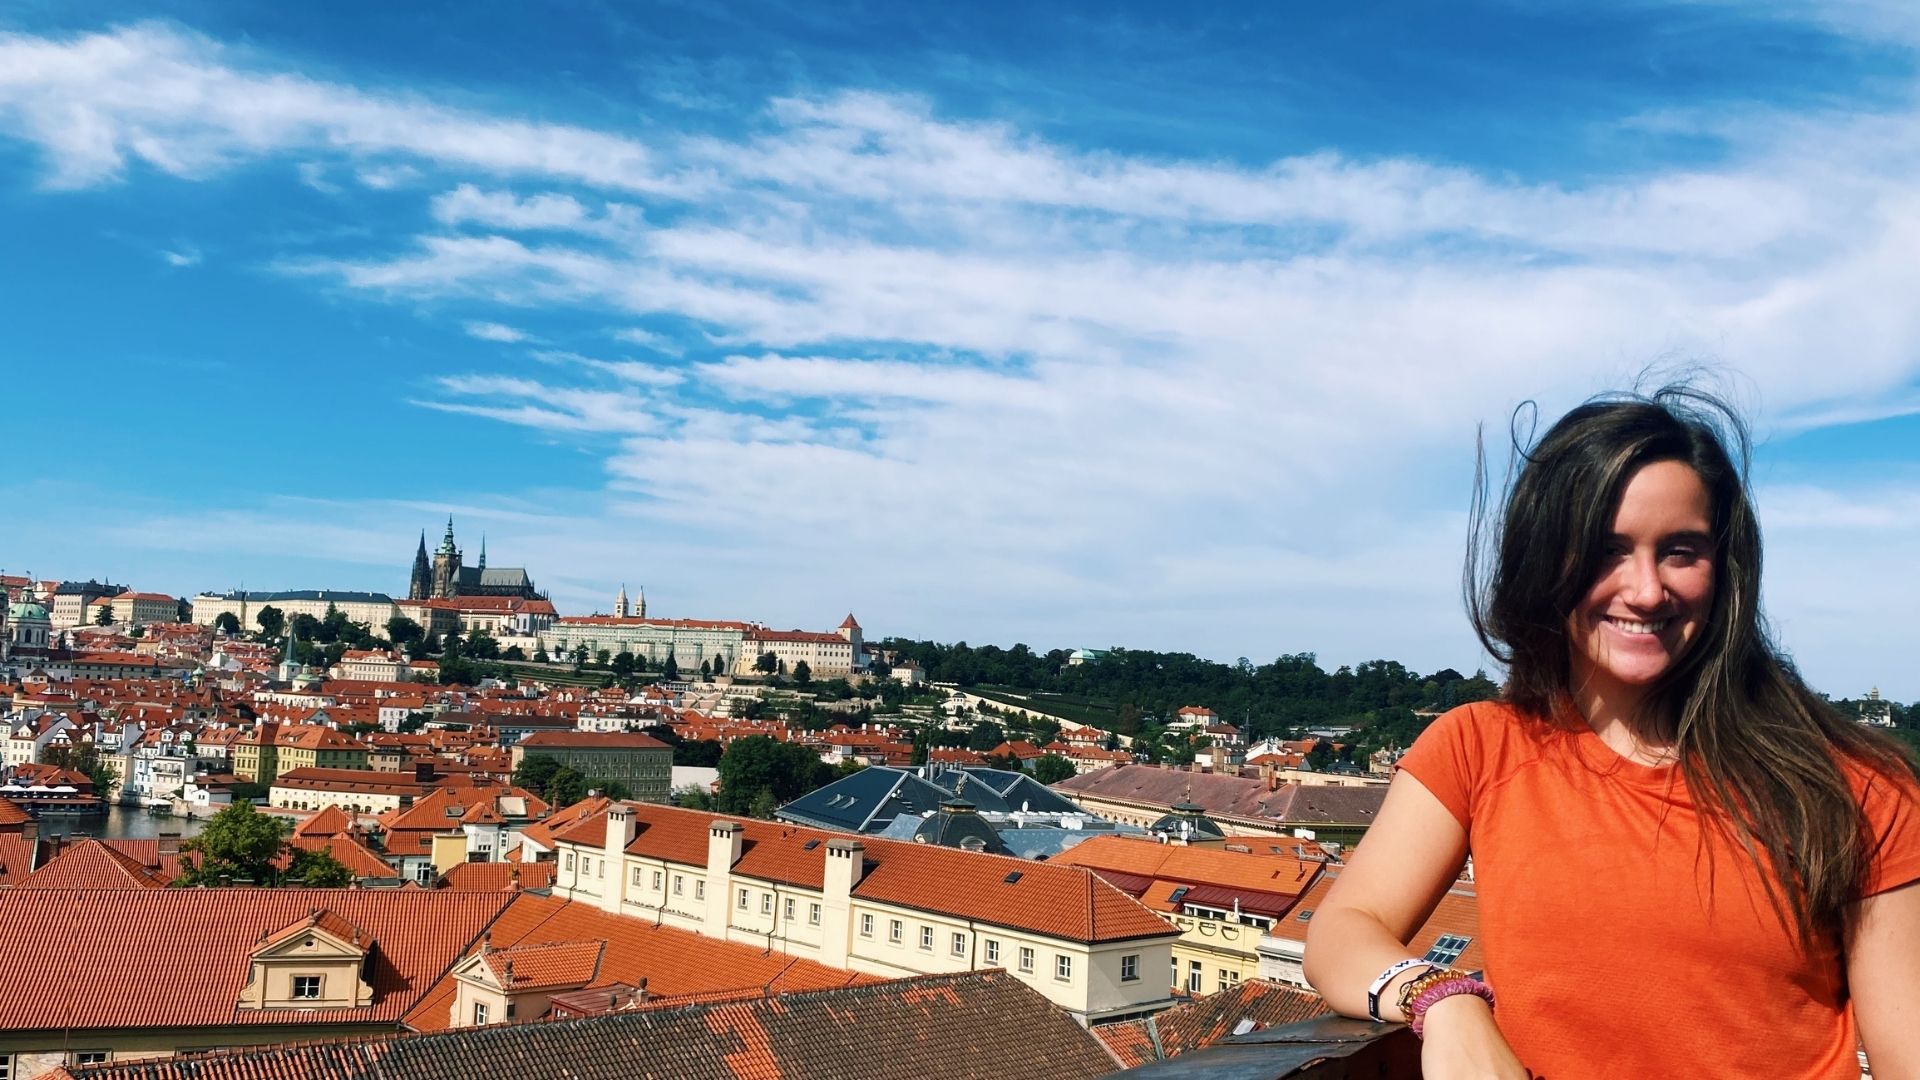 Reagan Glass taking a photo with Prague Castle in the background